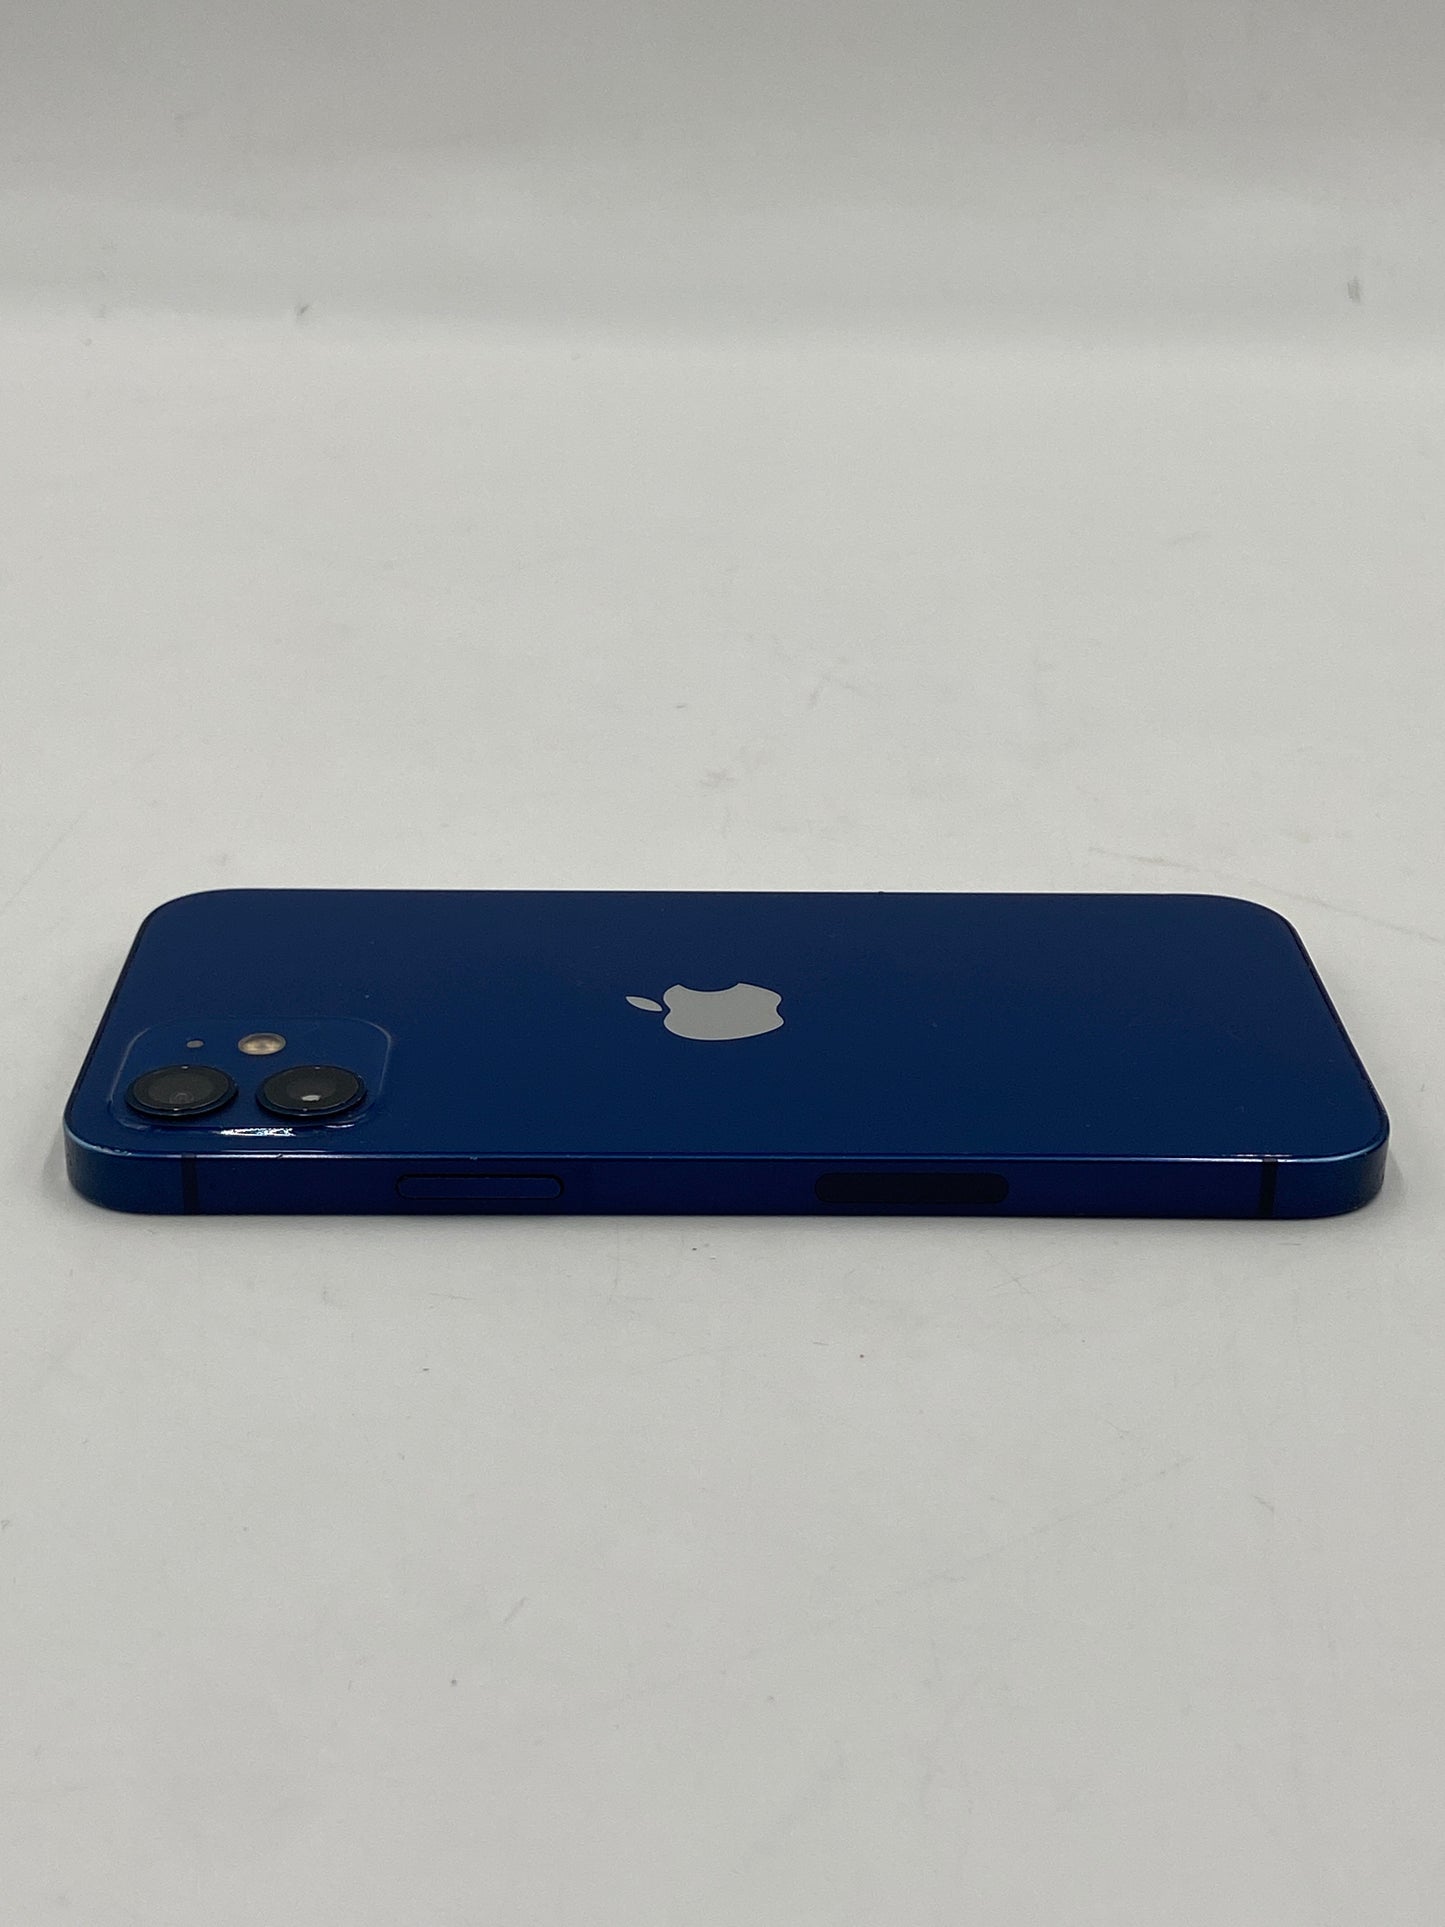 Unlocked Apple iPhone 12 64GB 16.0 Sierra Blue A2172 BAD CHARGER PORT